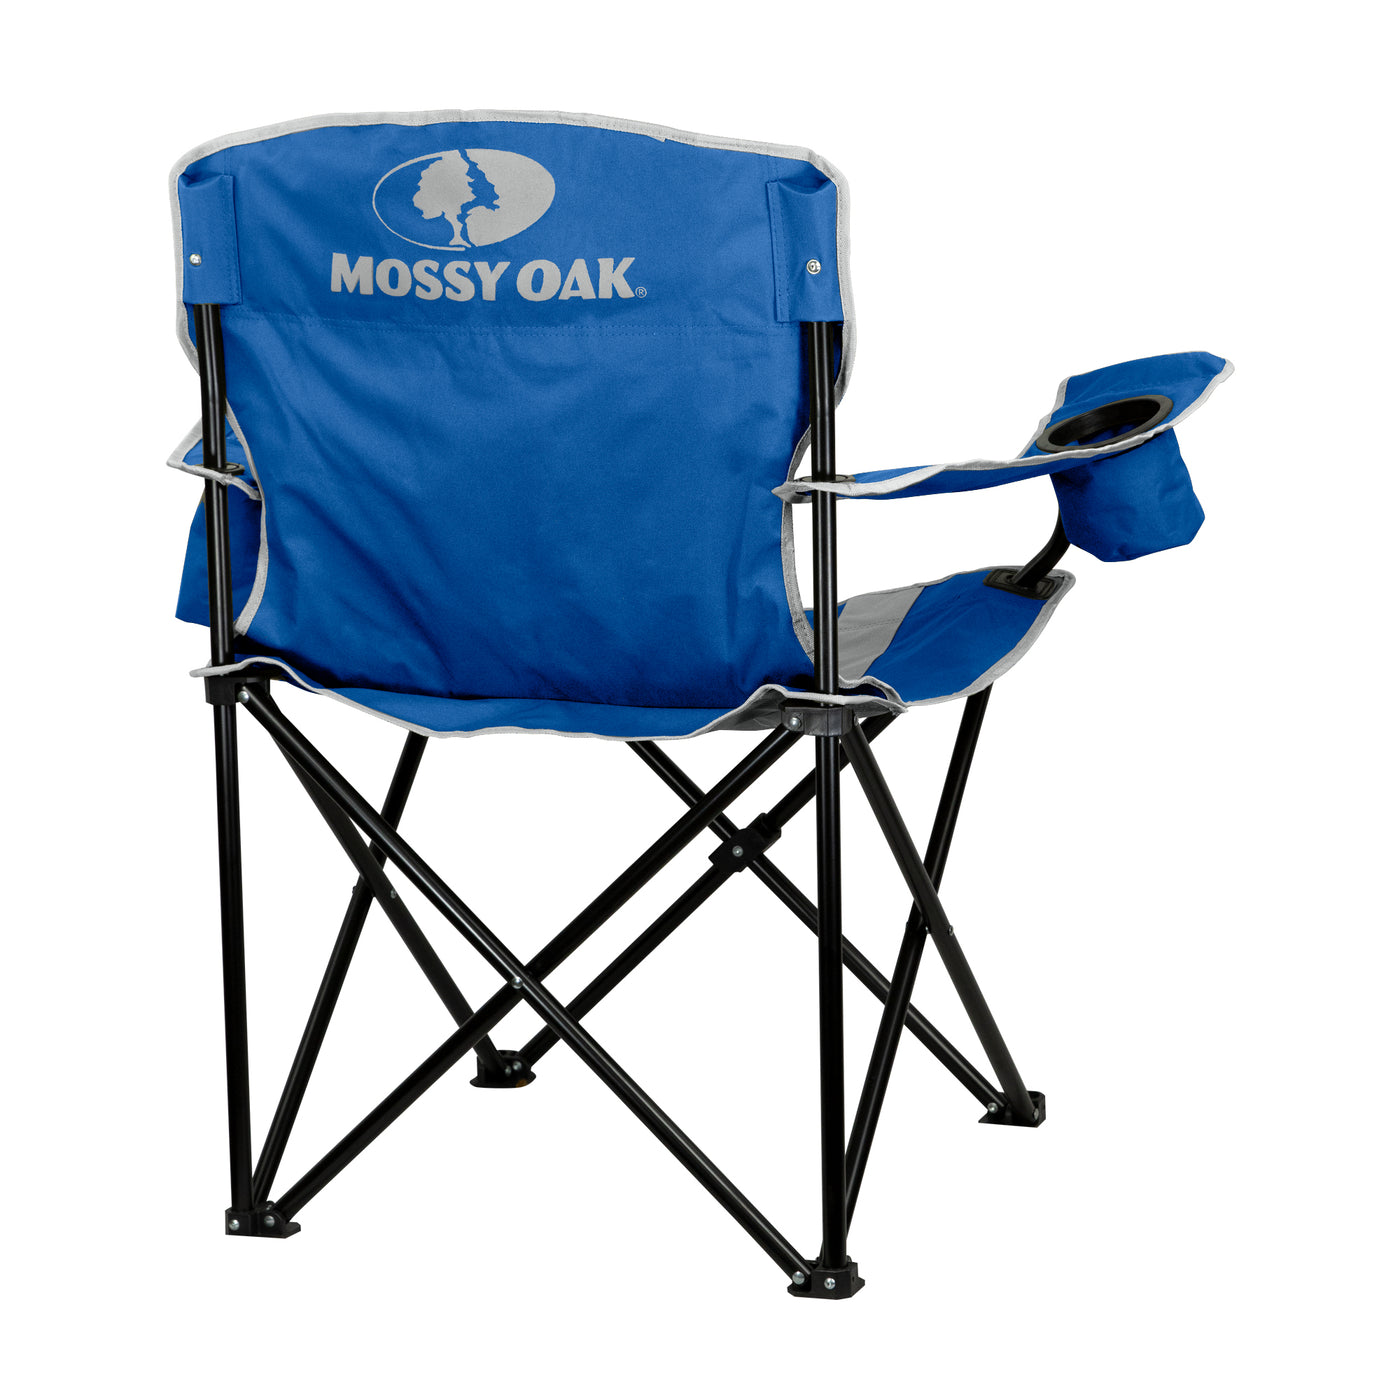 Mossy Oak Deluxe Folding Camping Chair Royal Back